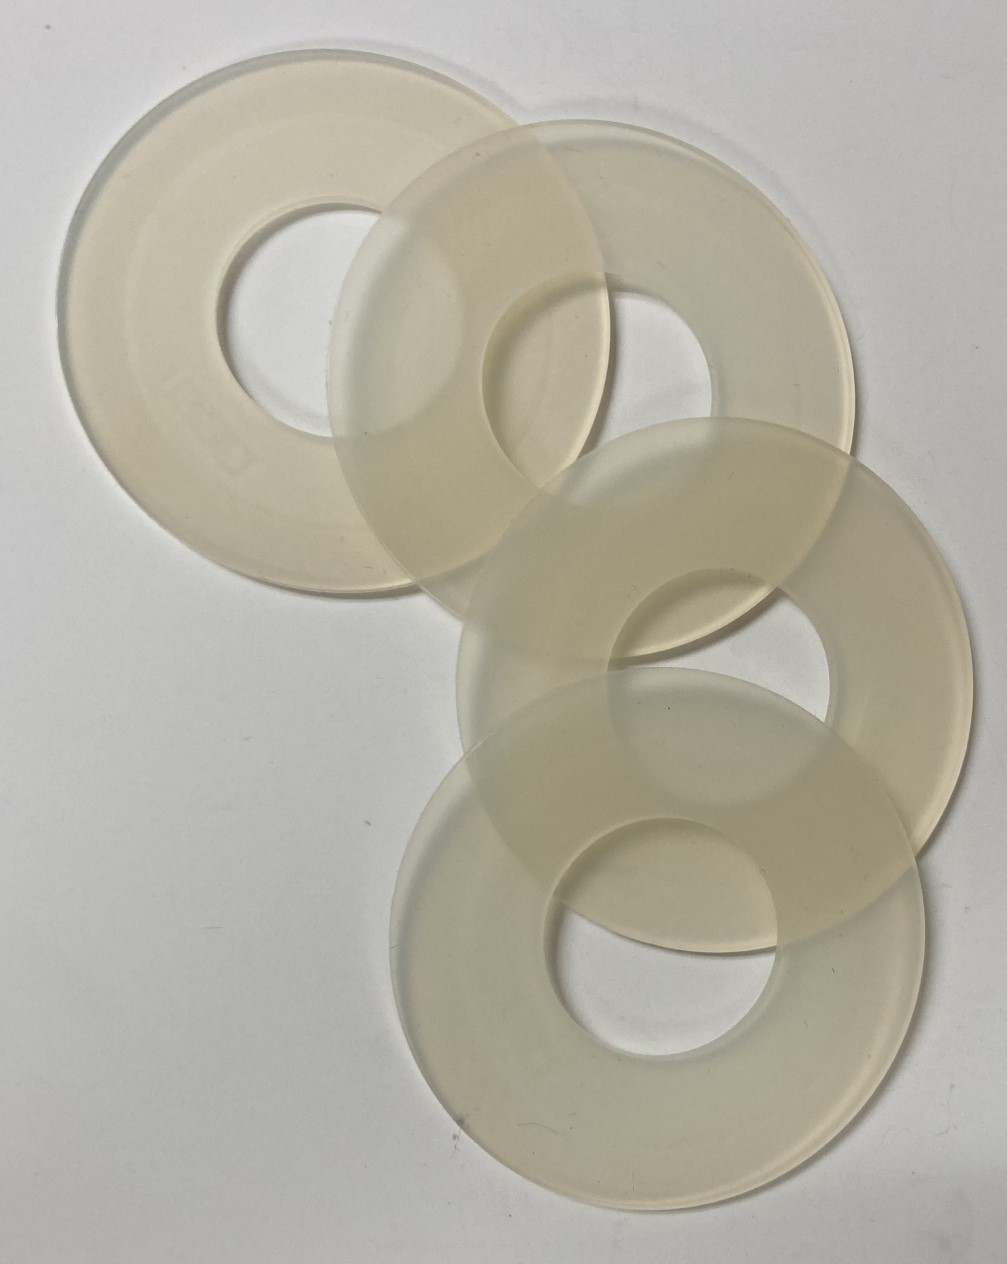 American Standard A Flush Valve Silicone Seals Pack Mm OD By Mm ID NuFlush